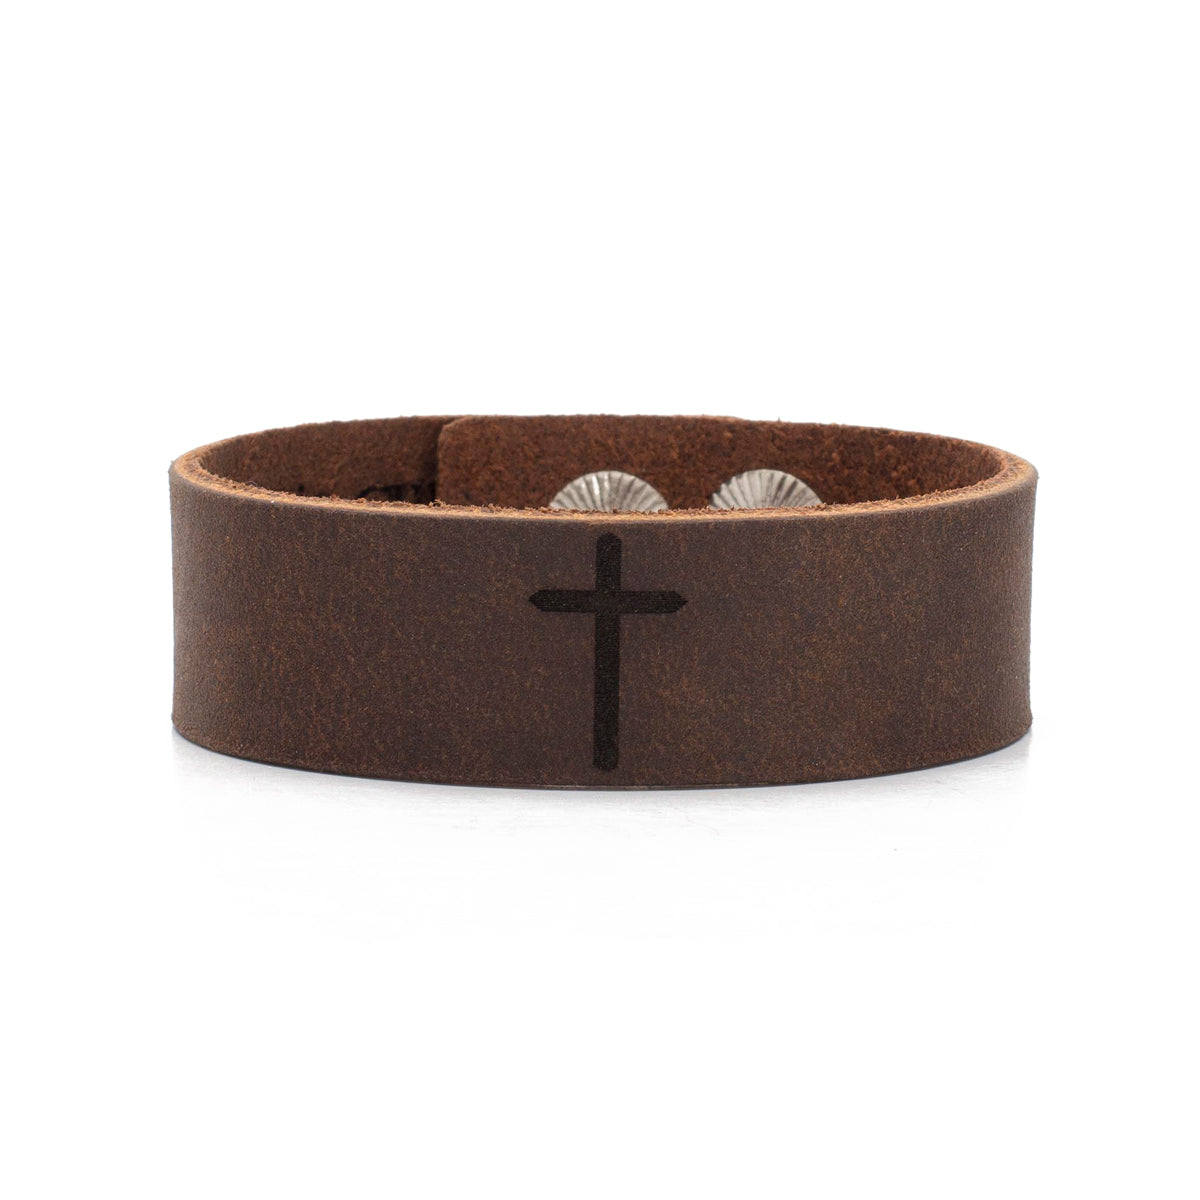 RC Men's Leather Snap Cuff .75 - Engraved Cross